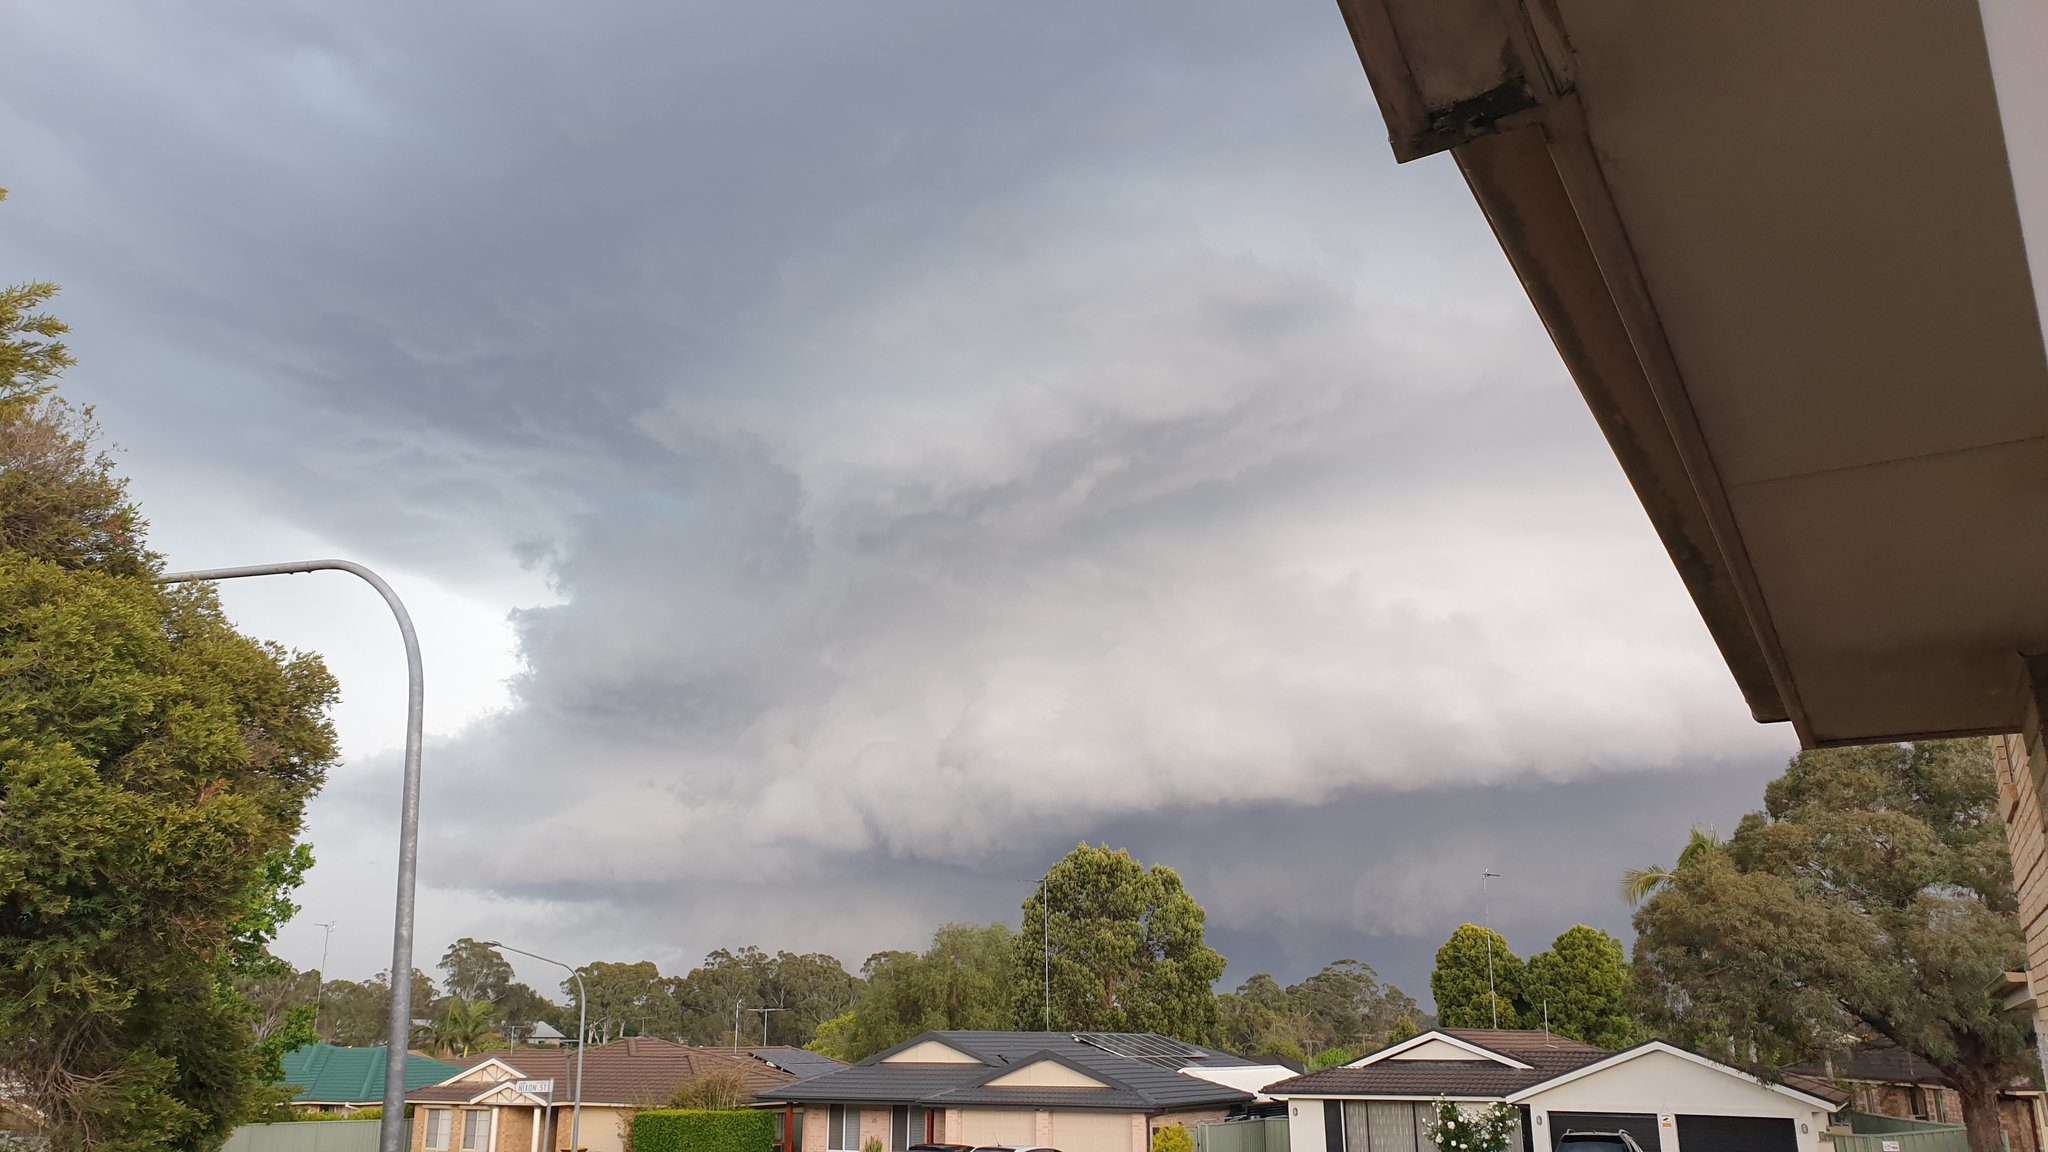 Tornado warning issued for Sydney as storms lash the city